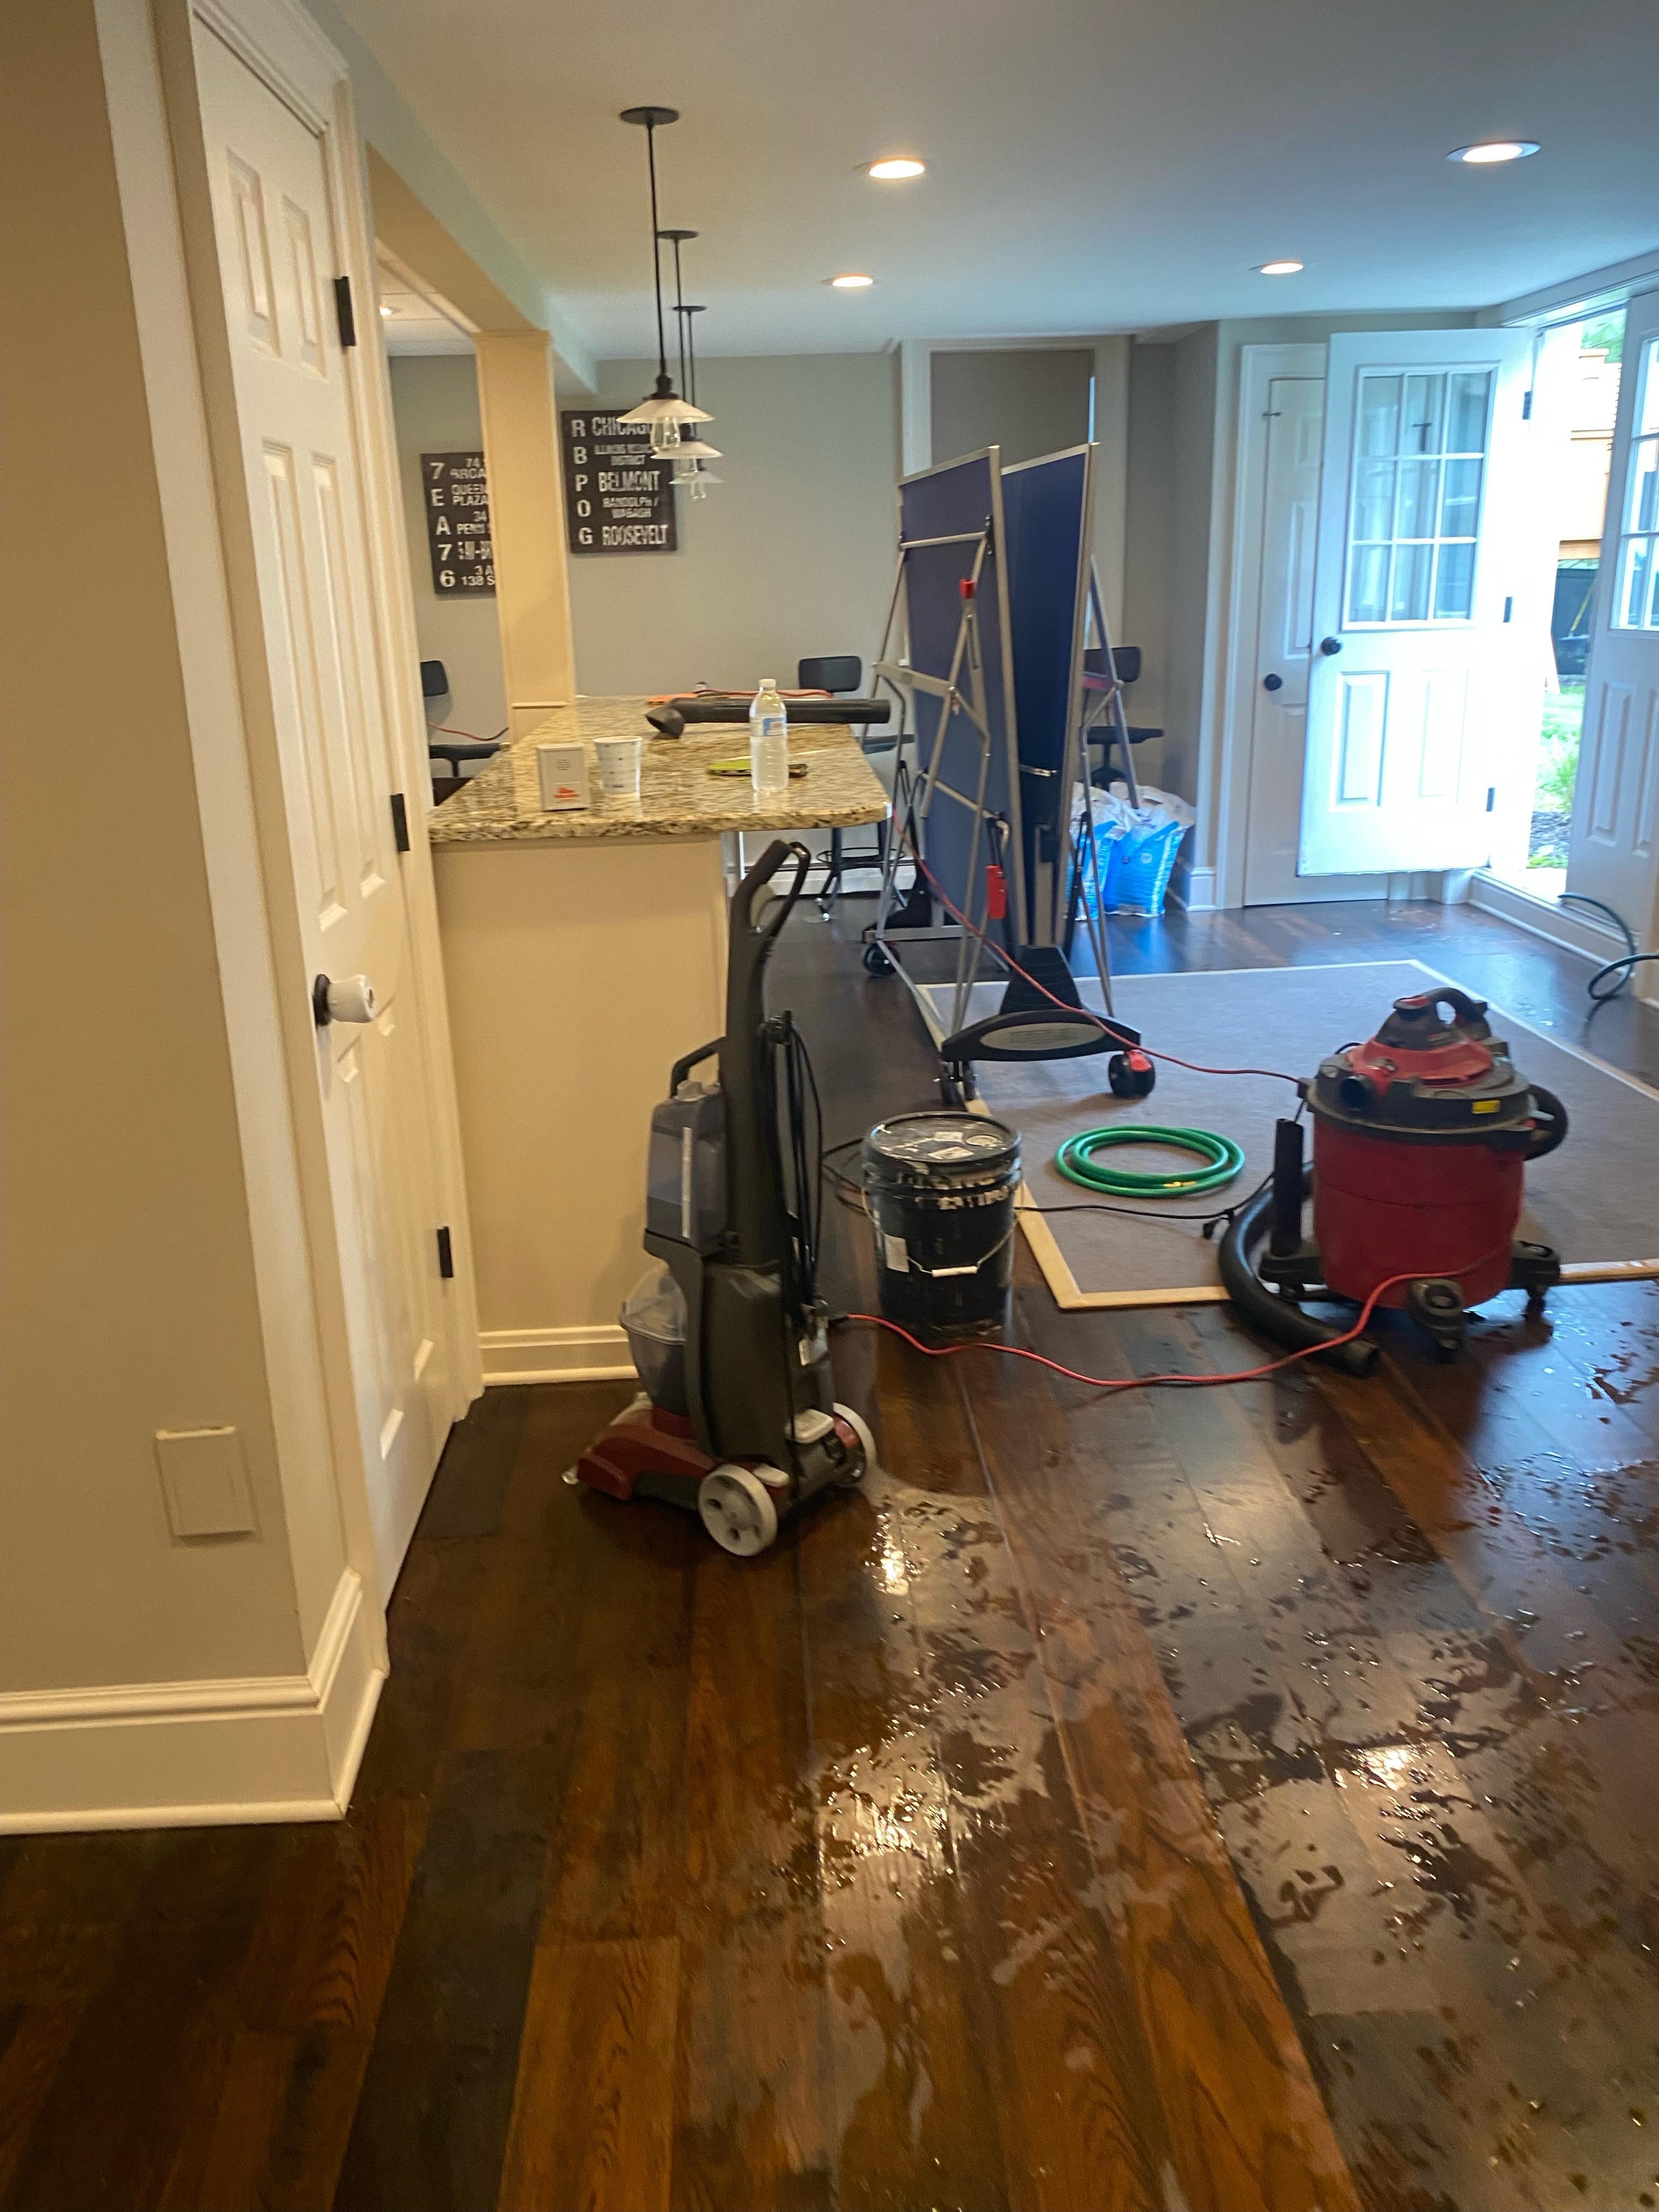 Water damage cleanup in finished basement